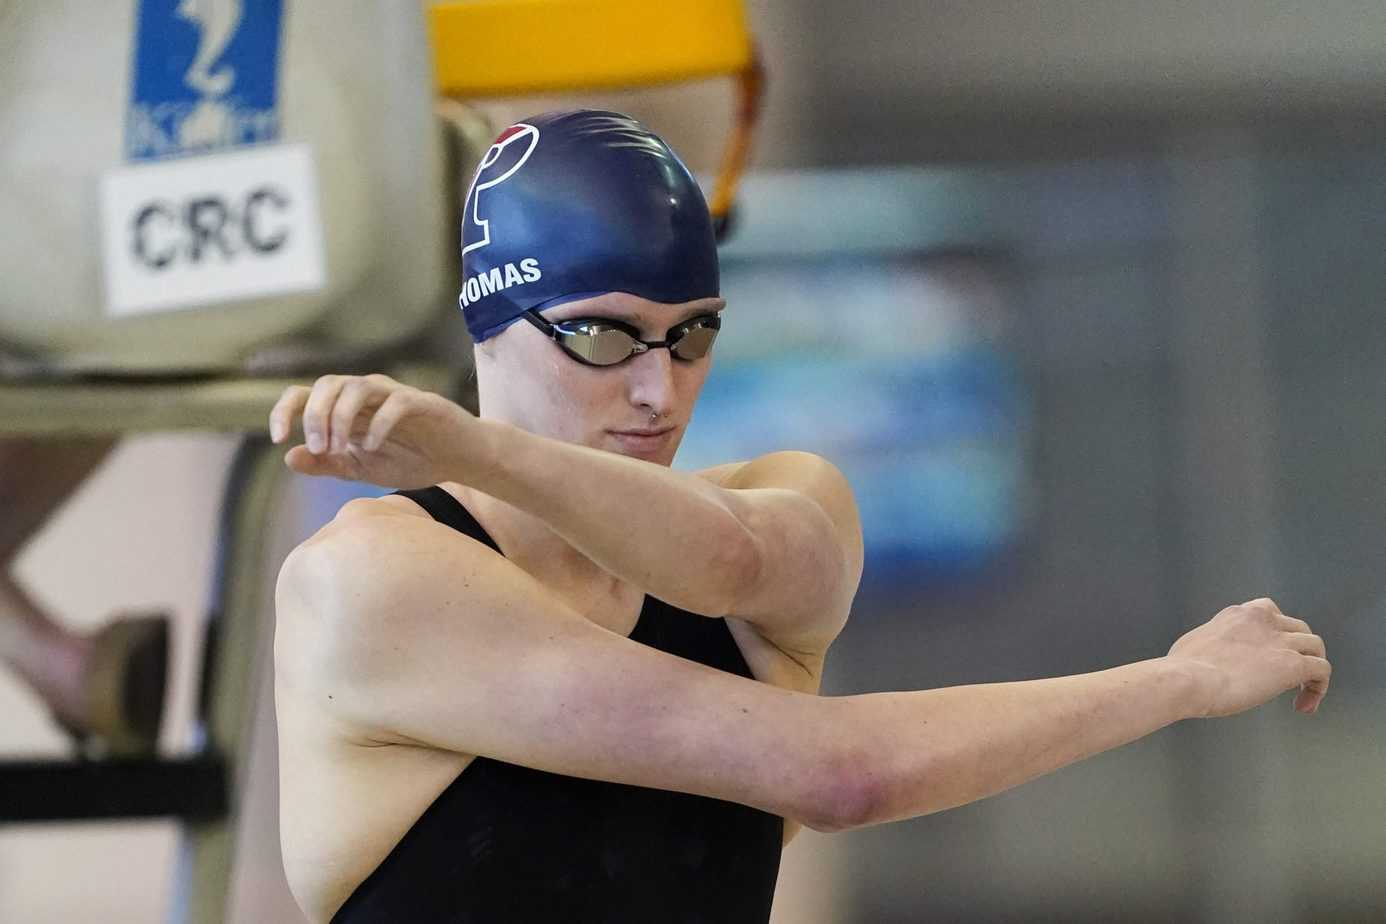 Penn swimmer Lia Thomas, who happens to be transgender, caused a ton of controversy after taking home a championship win Thursday